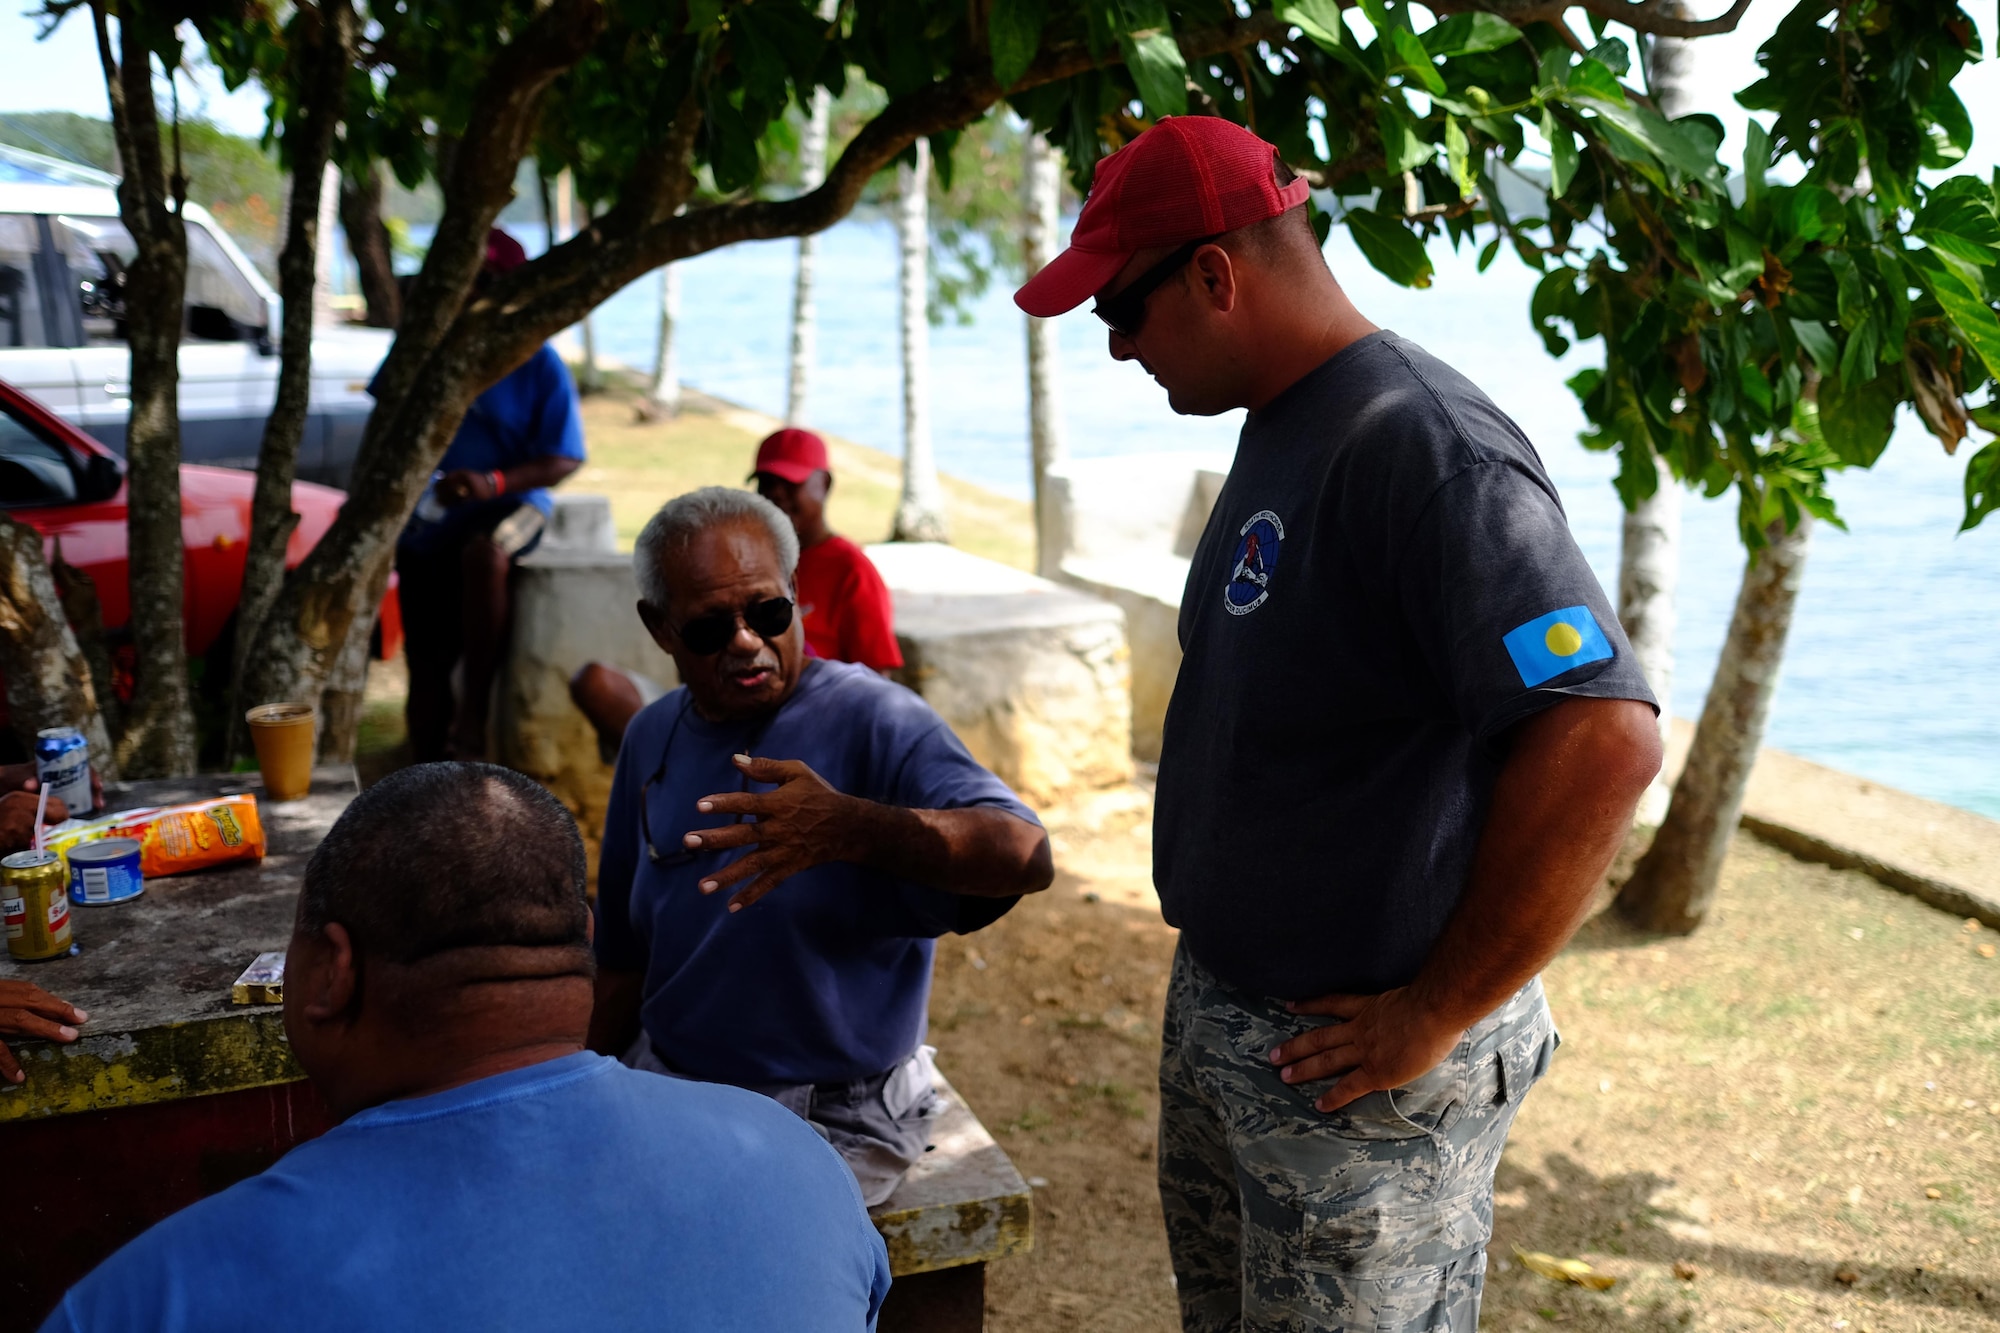 U.S. Air Force Staff Sgt. Chad King, Civil Action Team 554-01 heavy equipment operator from the 554th Red Horse Squardon at Andersen Air Force Base, Guam, speaks to local Palauan residents in Koror, Palau, Feb. 18, 2016. Airmen of CAT 554-01 provided construction capabilities, apprenticeship training, medical outreach, and community engagement opportunities while deployed to the Republic of Palau. (U.S. Air Force photo by Staff Sgt. Christopher Stoltz/Released)